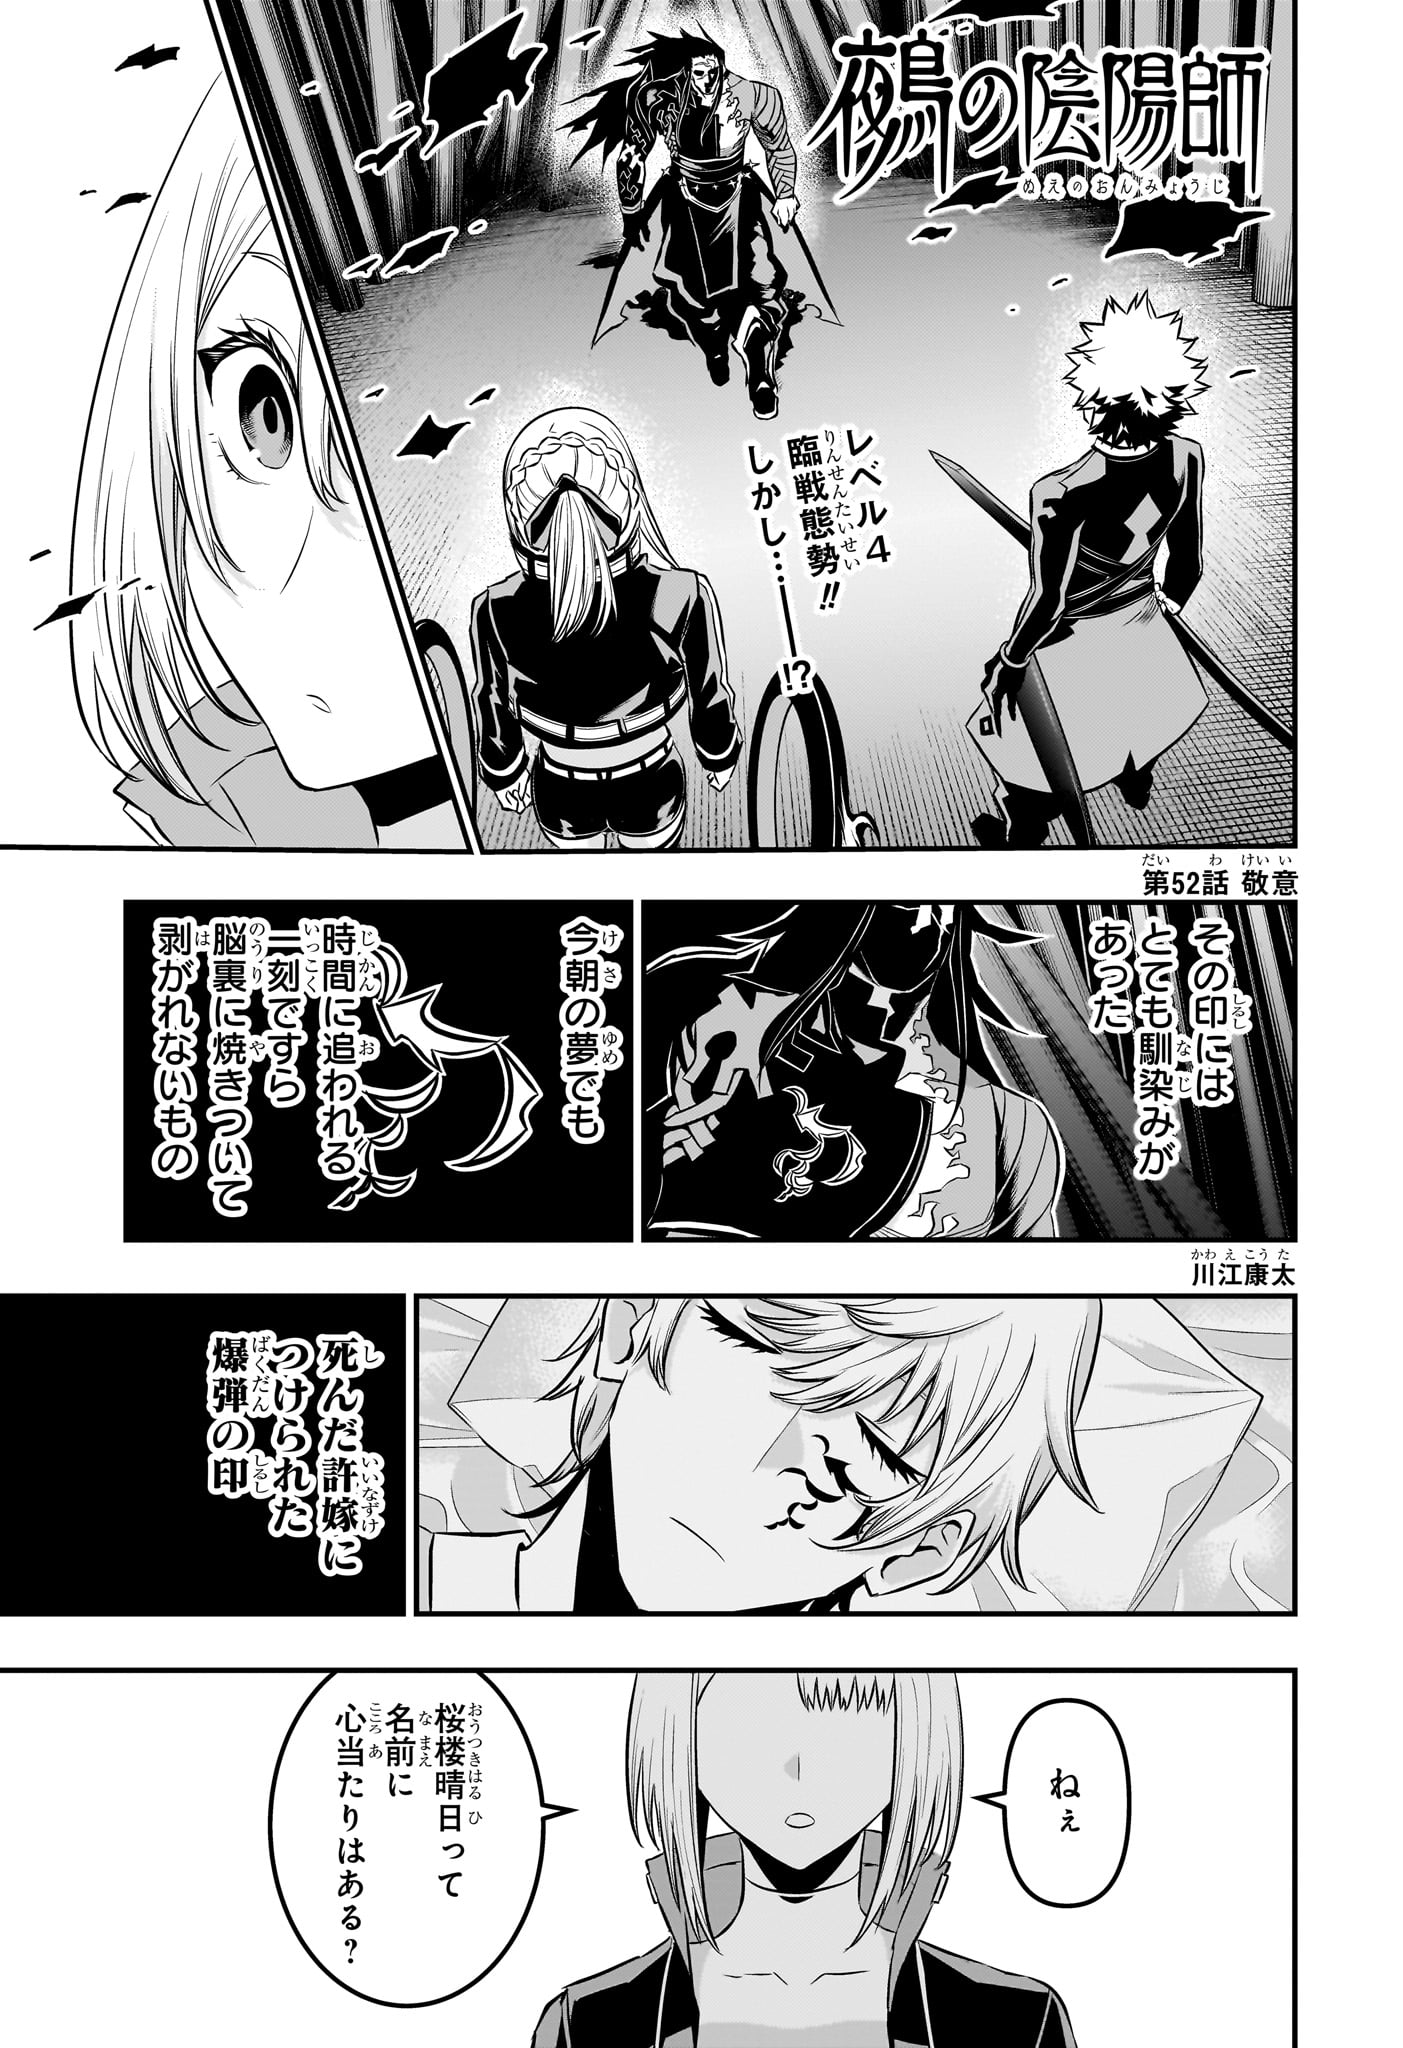 Nue no Onmyouji - Chapter 52 - Page 1